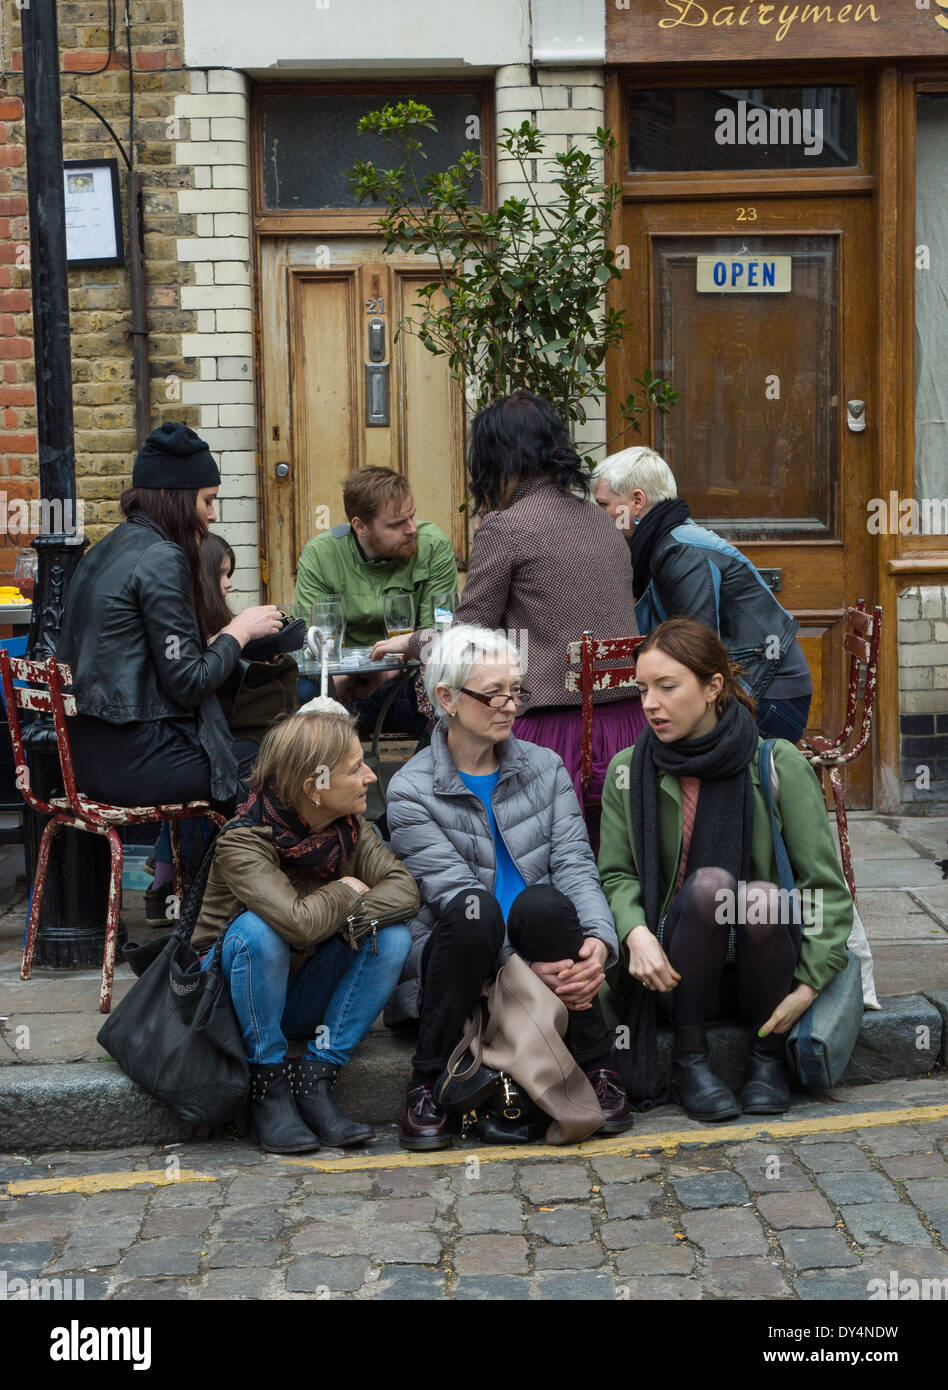 group of people outside a pub in London Stock Photo